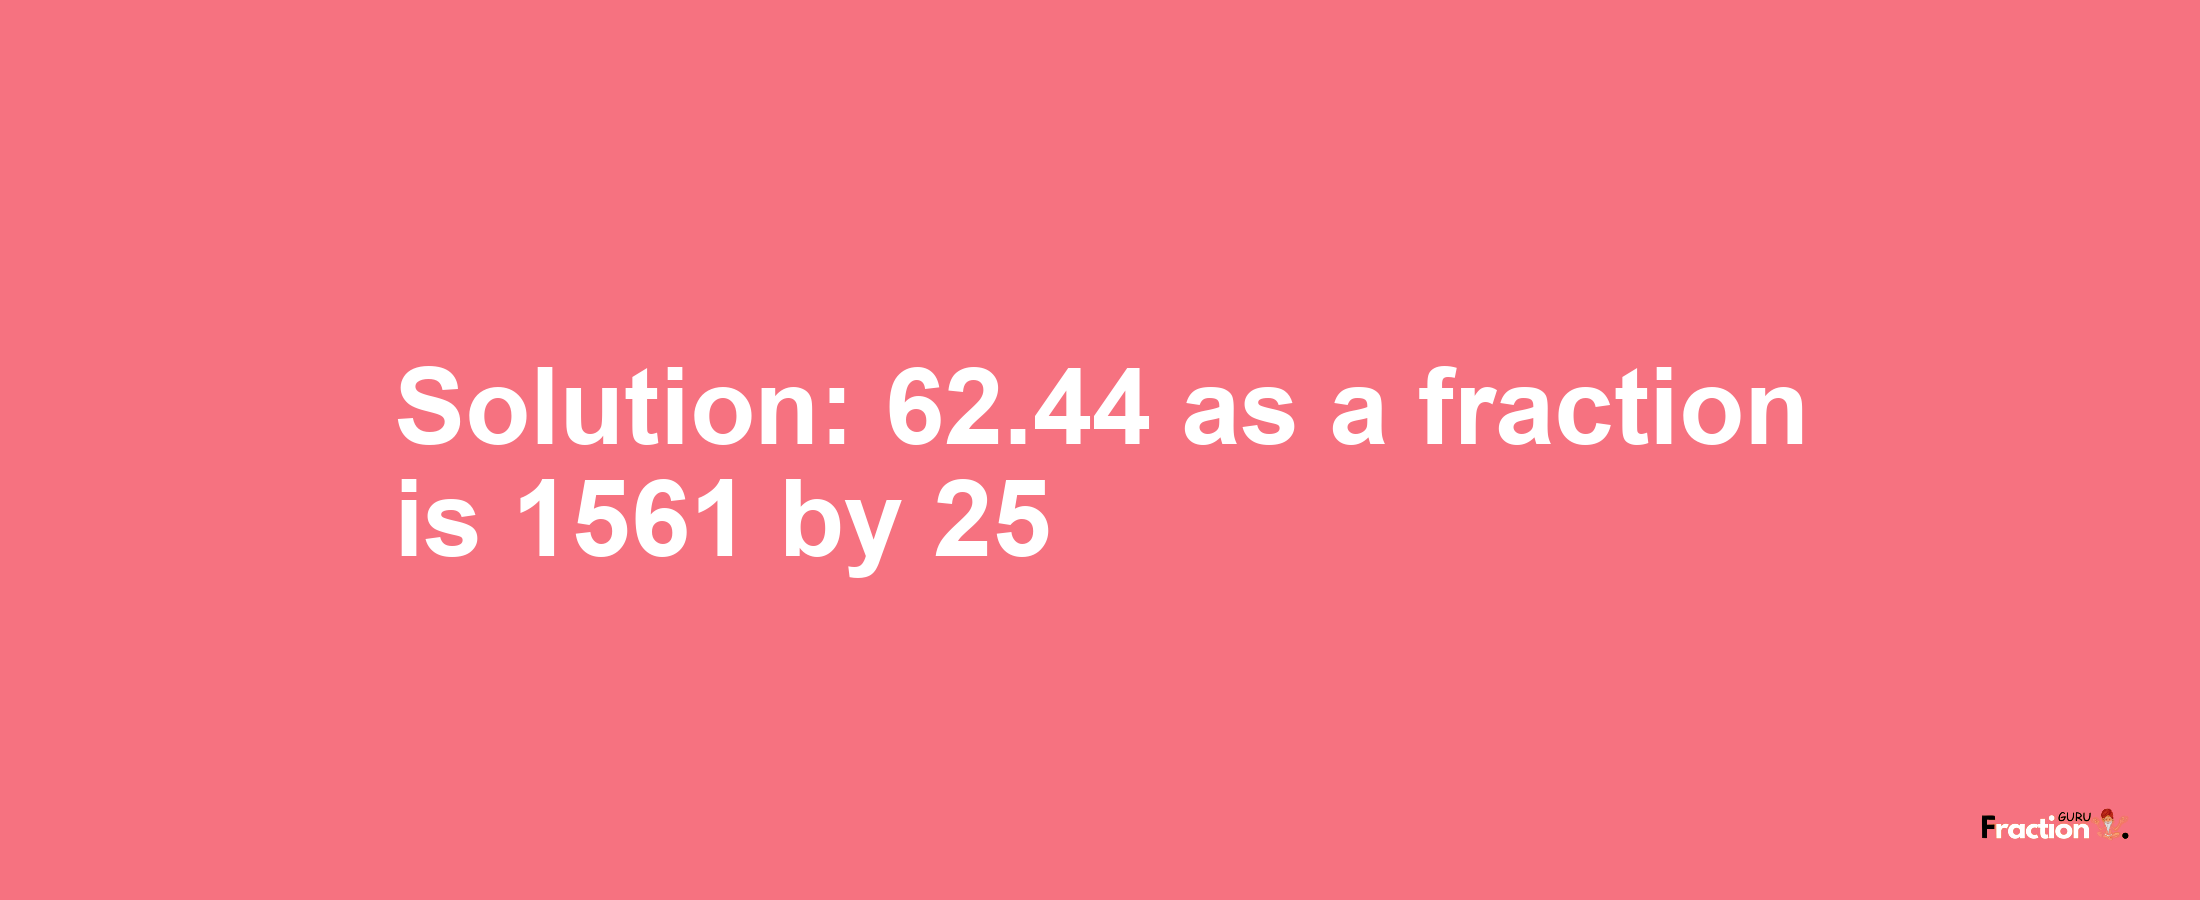 Solution:62.44 as a fraction is 1561/25